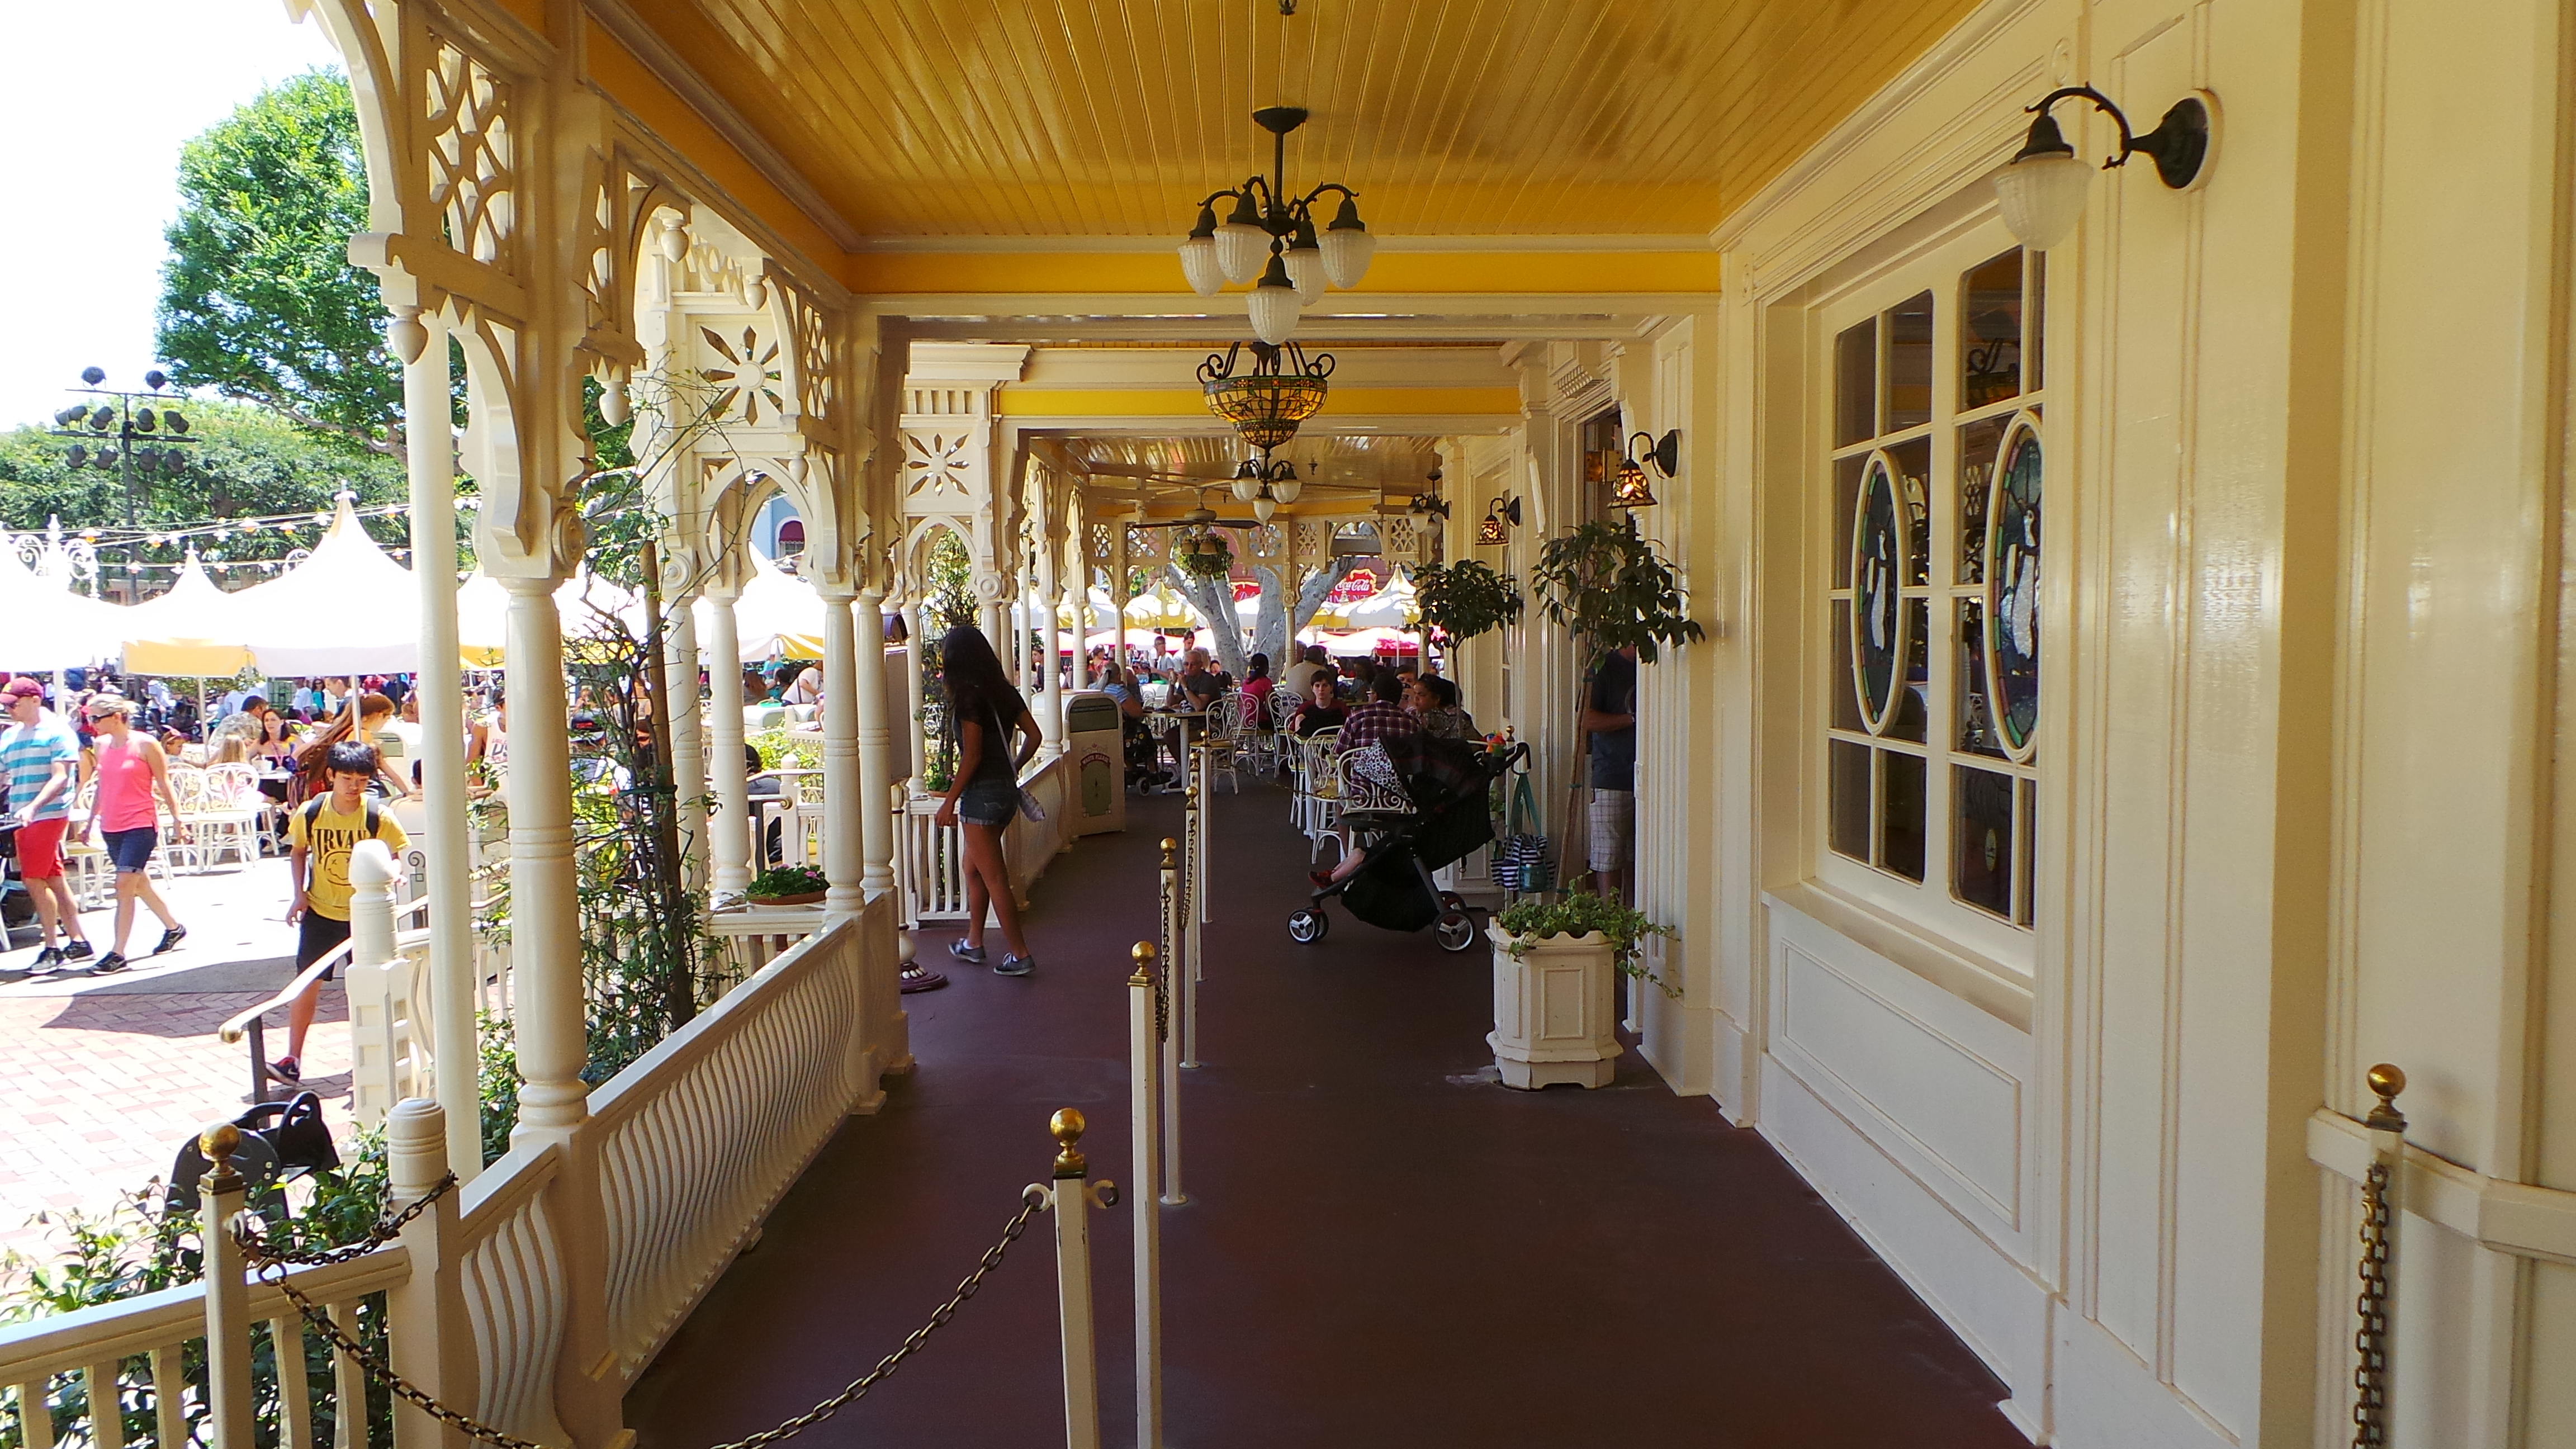 The View to the Right of Our Table Jolly Holiday Bakery Cafe Disneyland